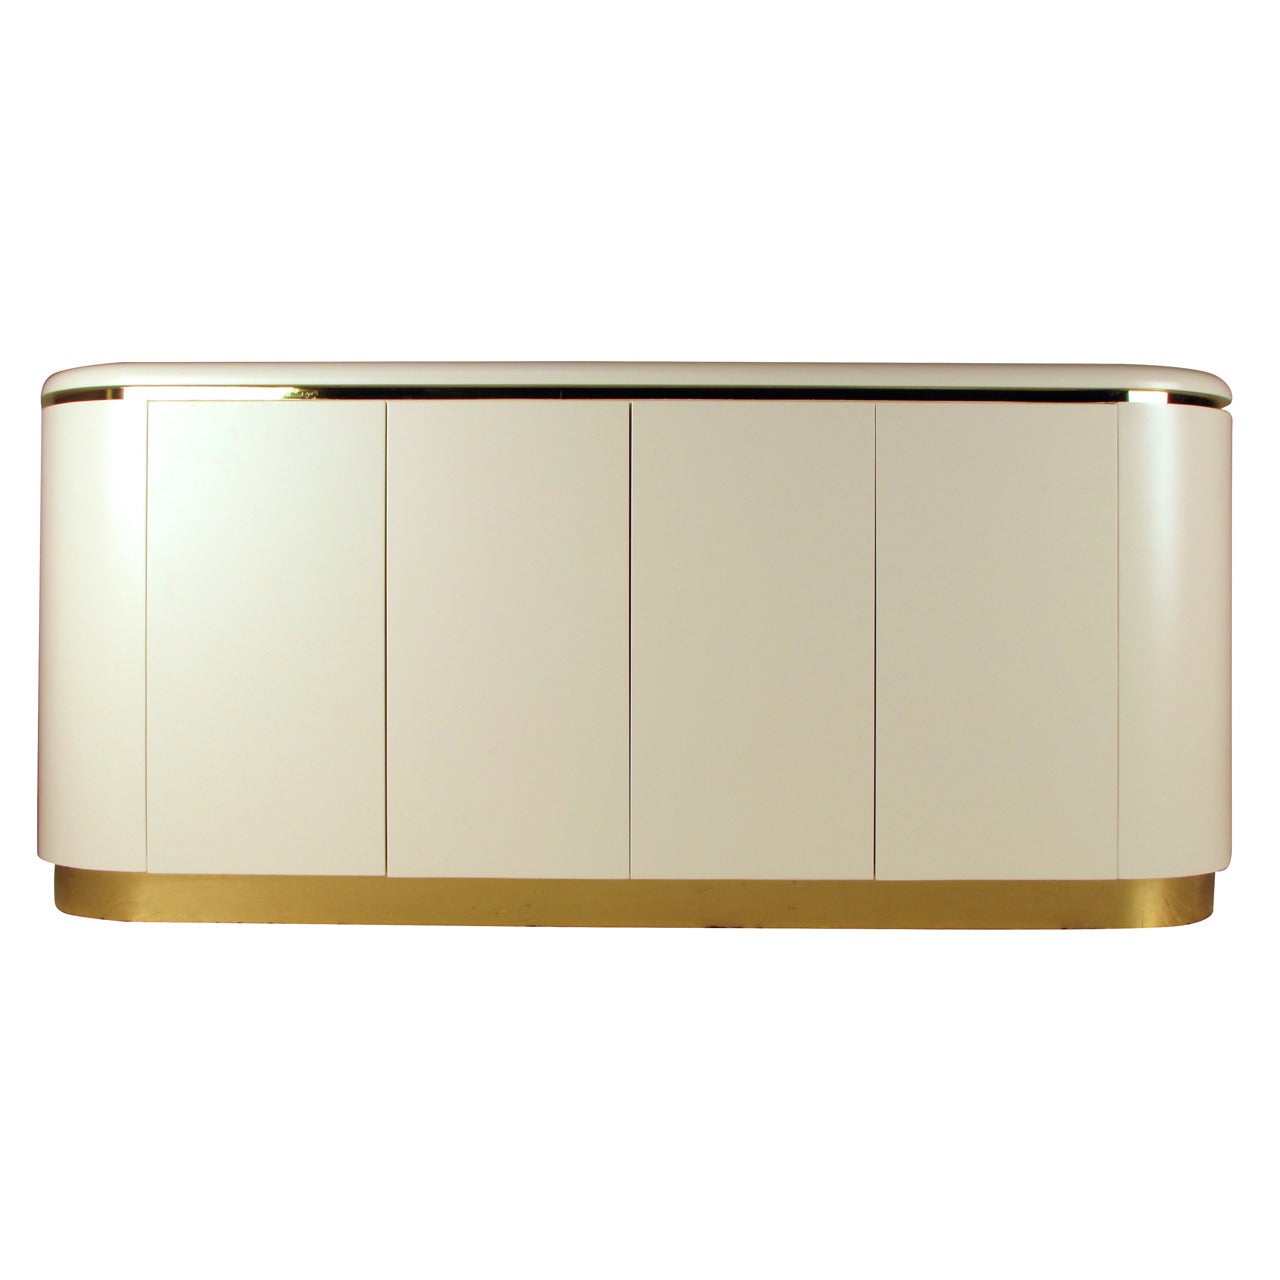 Mastercraft Rounded Credenza with Brass Details, Freshly Lacquered